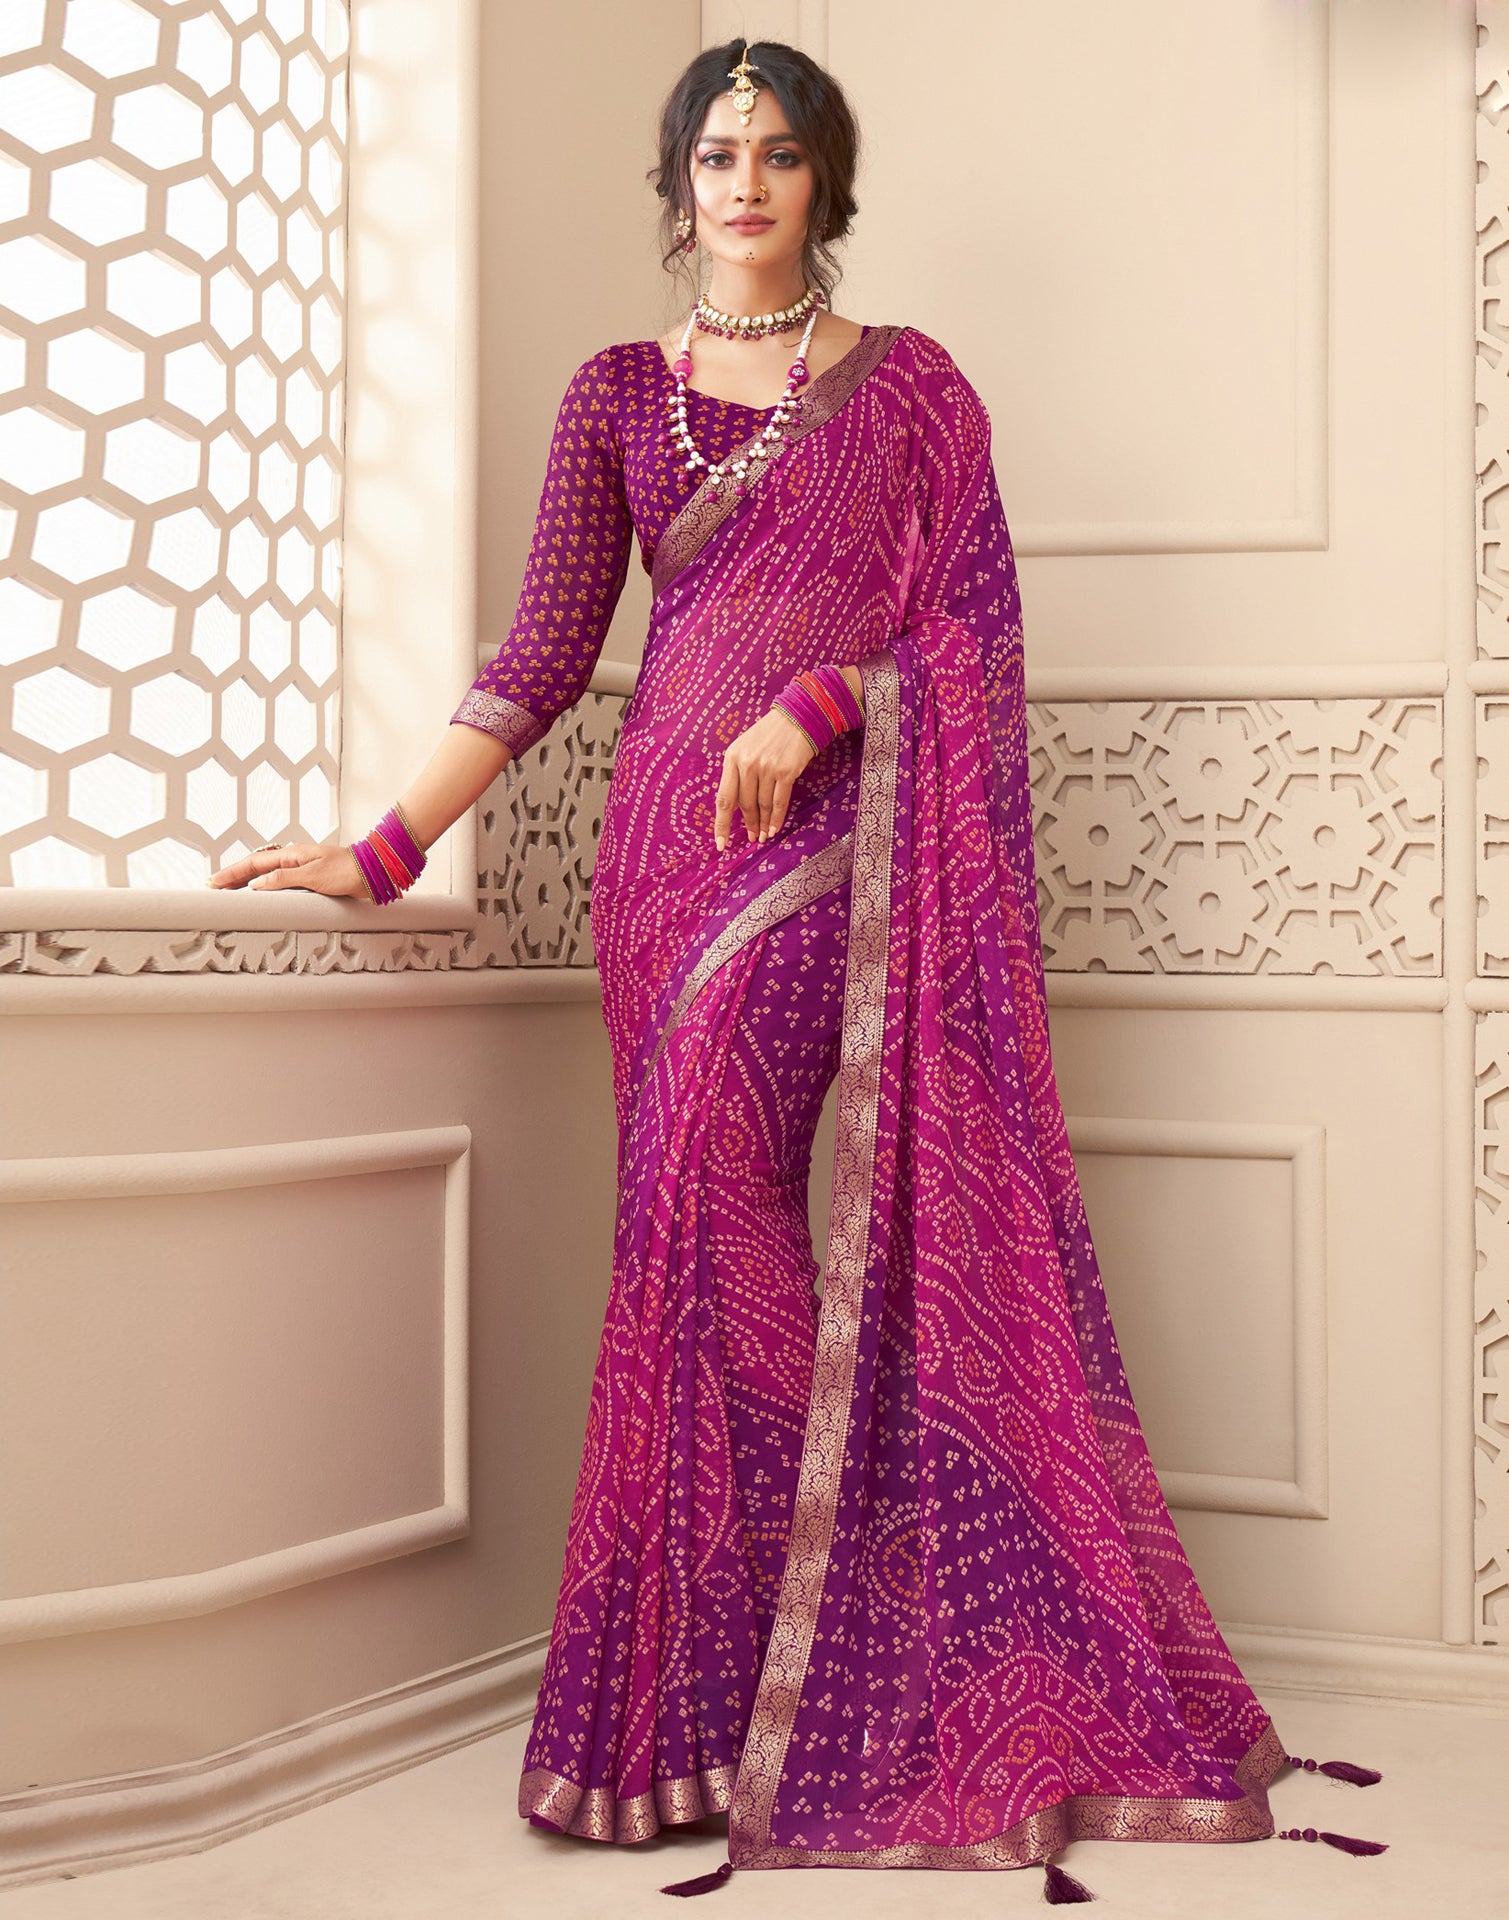 Designer Bandhani Saree Pure Georgette 10143, Buy Designer Bandhani Sarees  online, Pure Designer Bandhani Sarees, Trendy Designer Bandhani Sarees ,Buy  Designer Collection online , online shopping india, sarees , apparel online  in